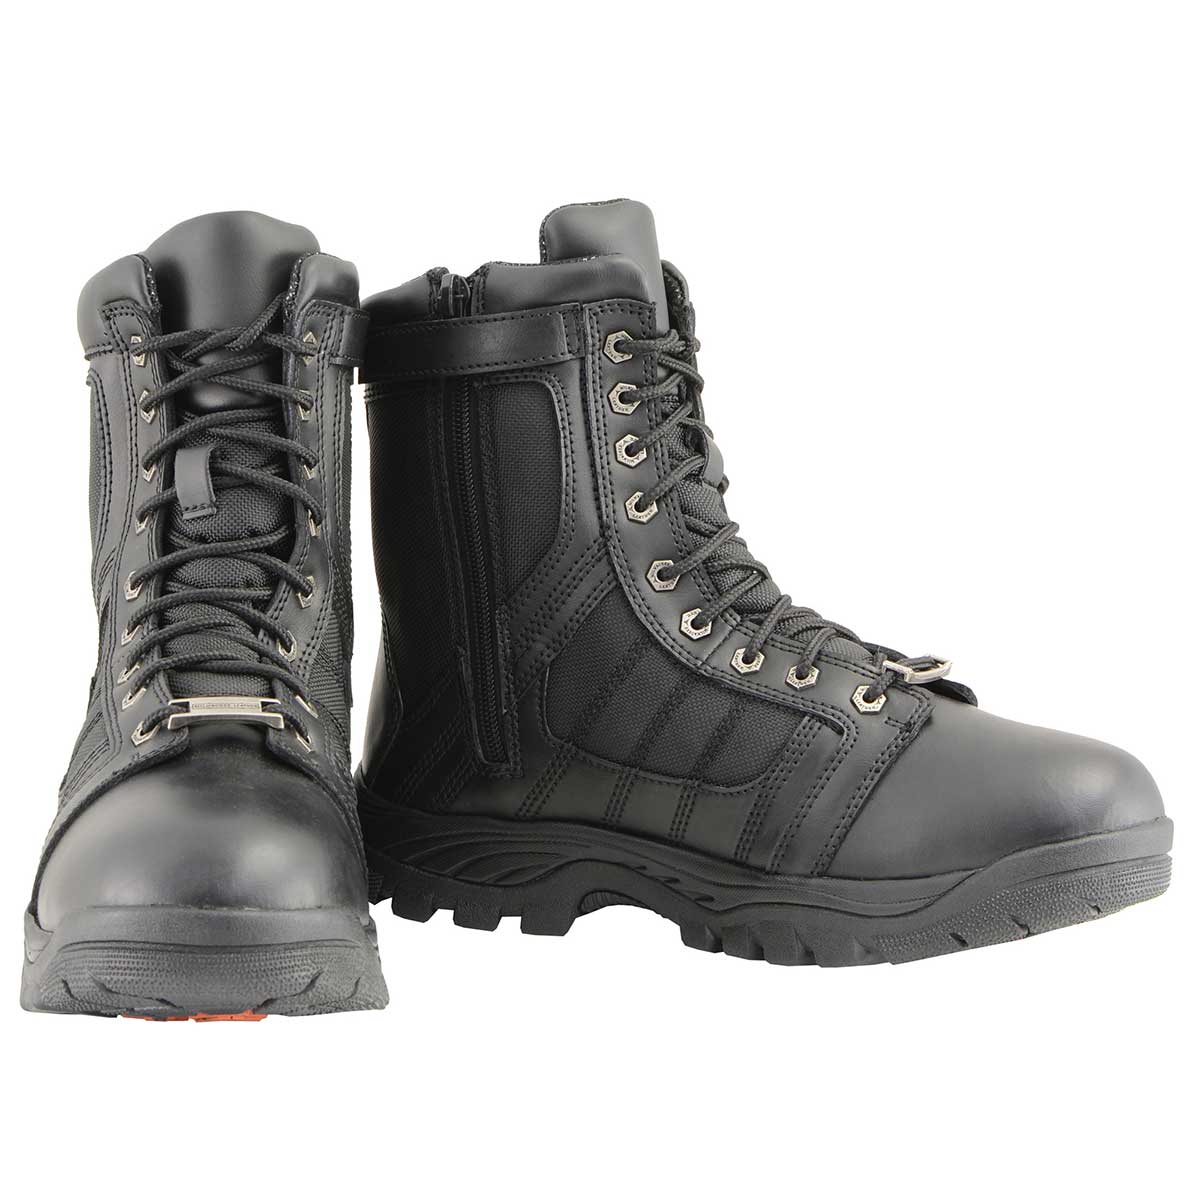 Milwaukee Leather MBM9130WP Men’s Black Lace-Up Waterproof Swat Style-Tactical Biker Motorcycle Boots